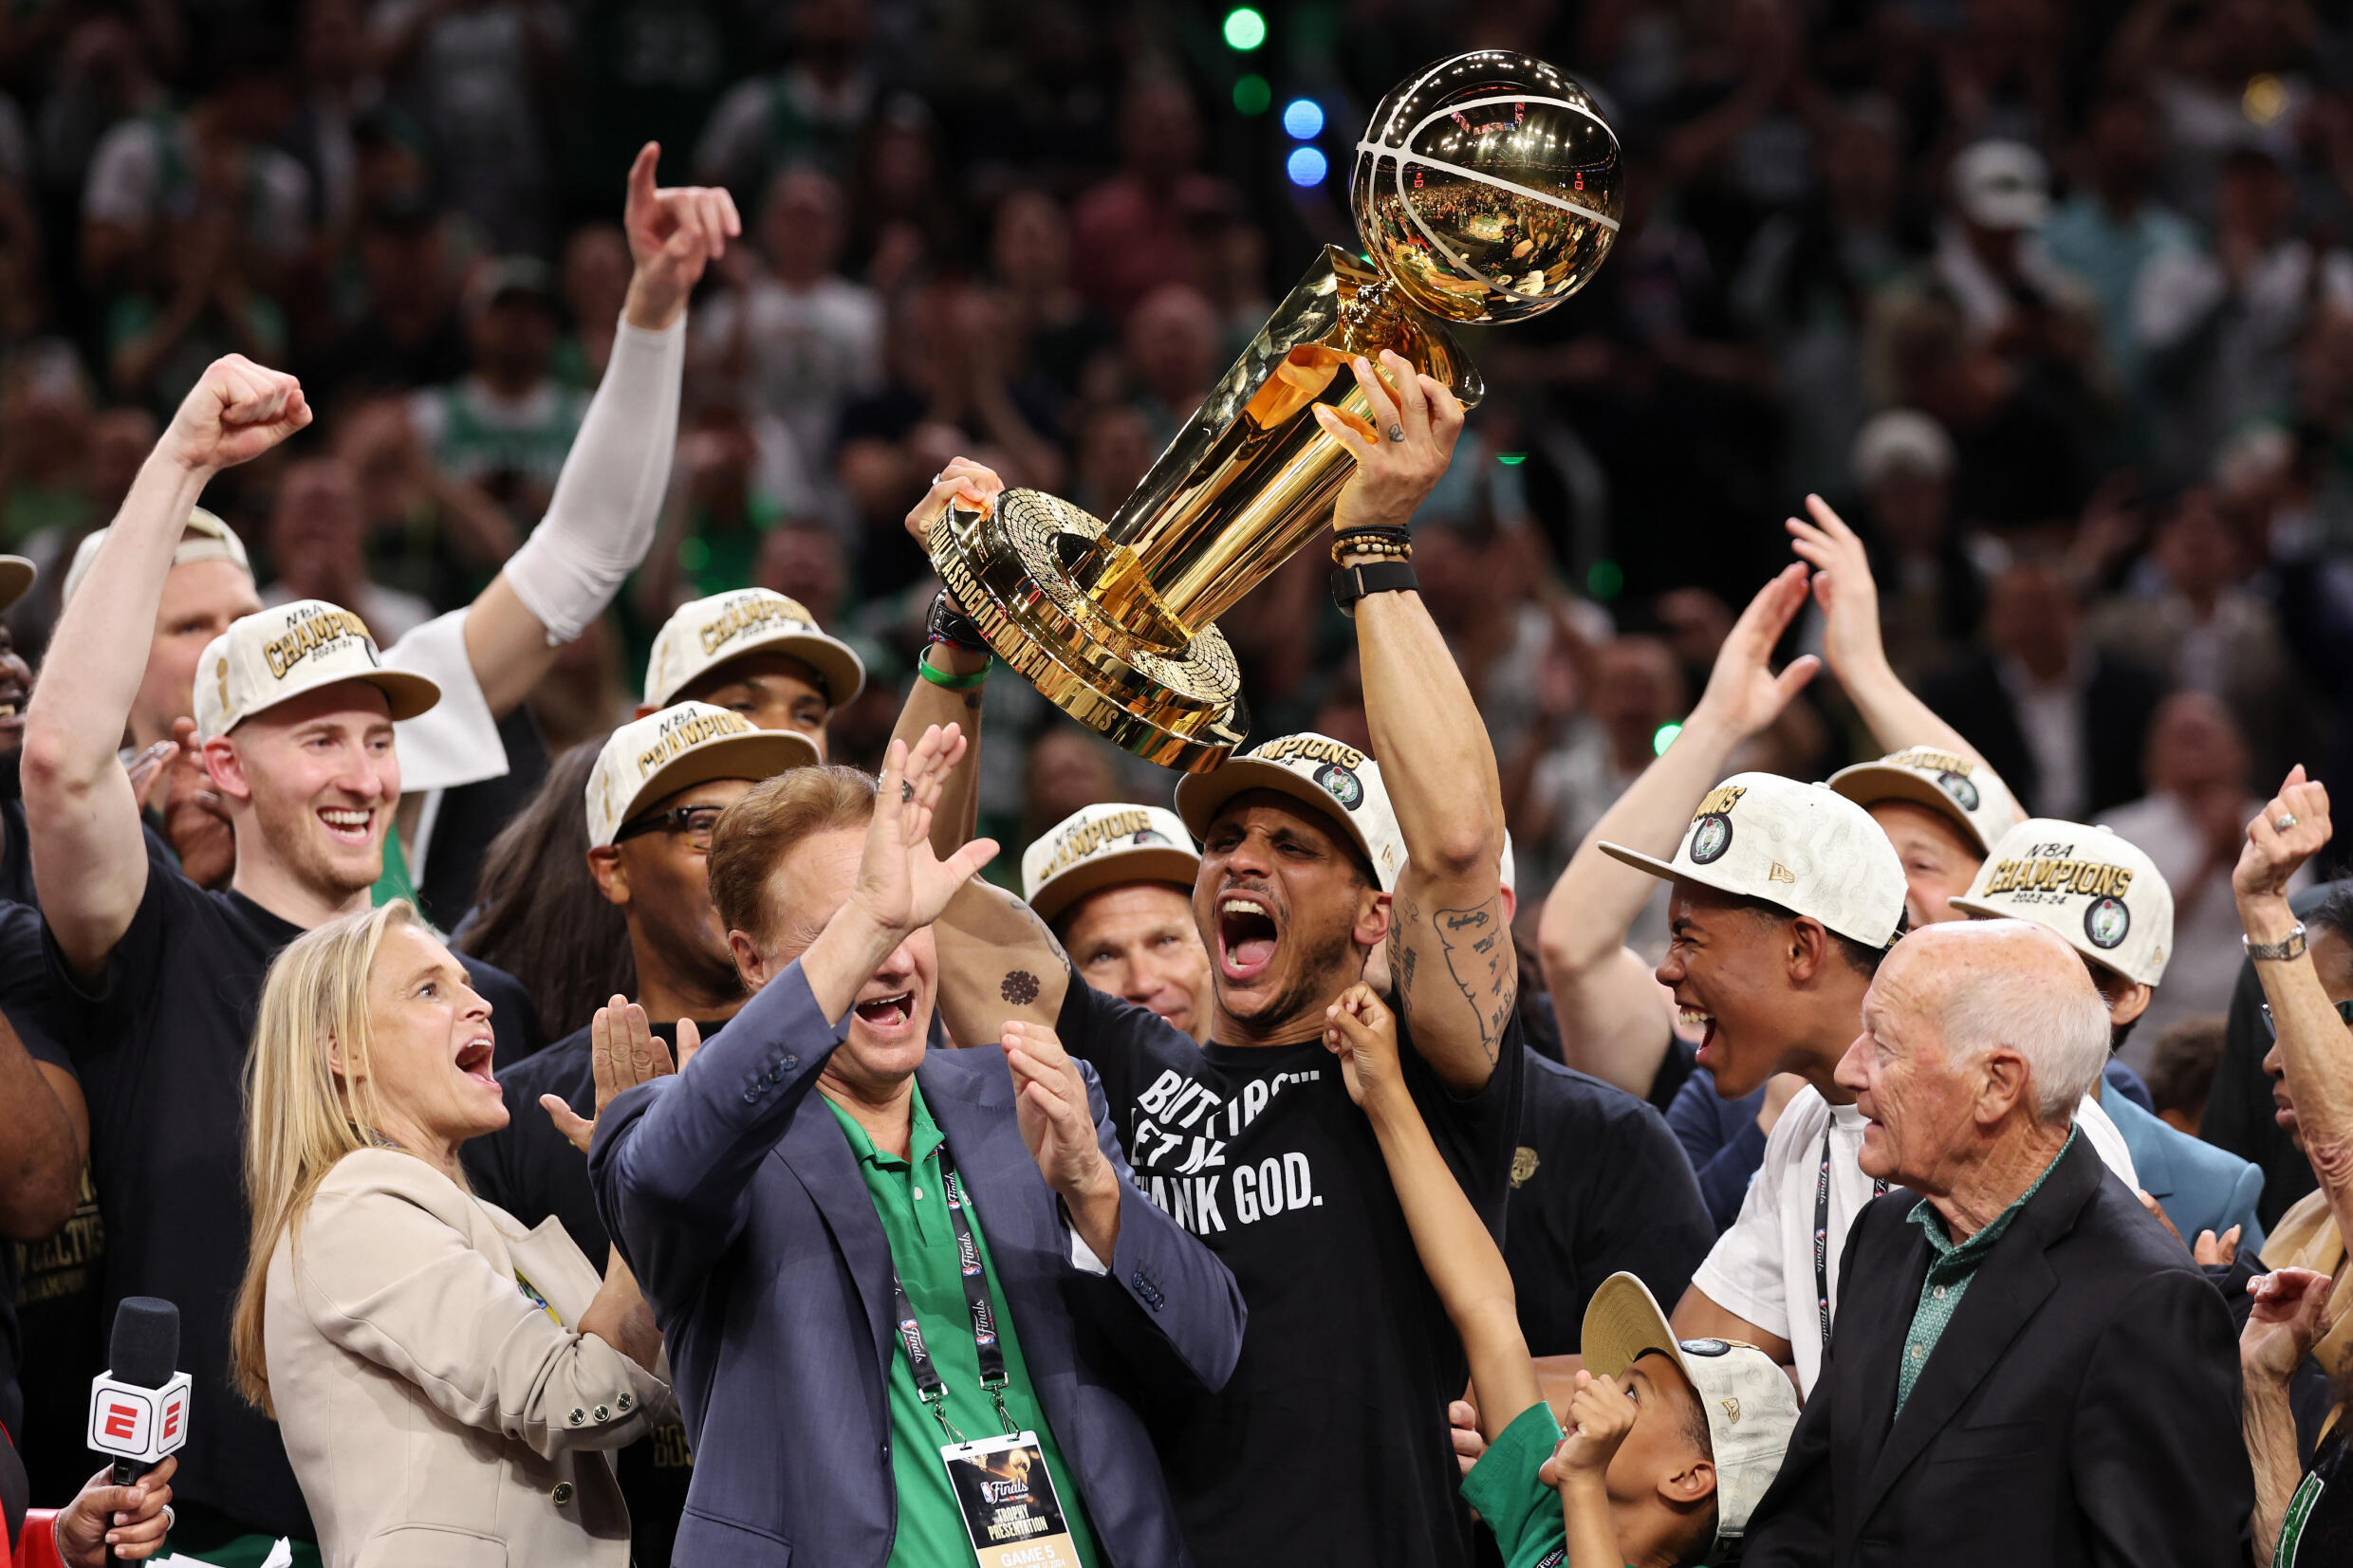 Boston Celtics head coach Joe Mazzulla shouts while lifting the trophy after his team's 106-88 victory over the Dallas Mavericks in Game 5 of the 2024 NBA Finals at TD Garden in Boston on June 17, 2024